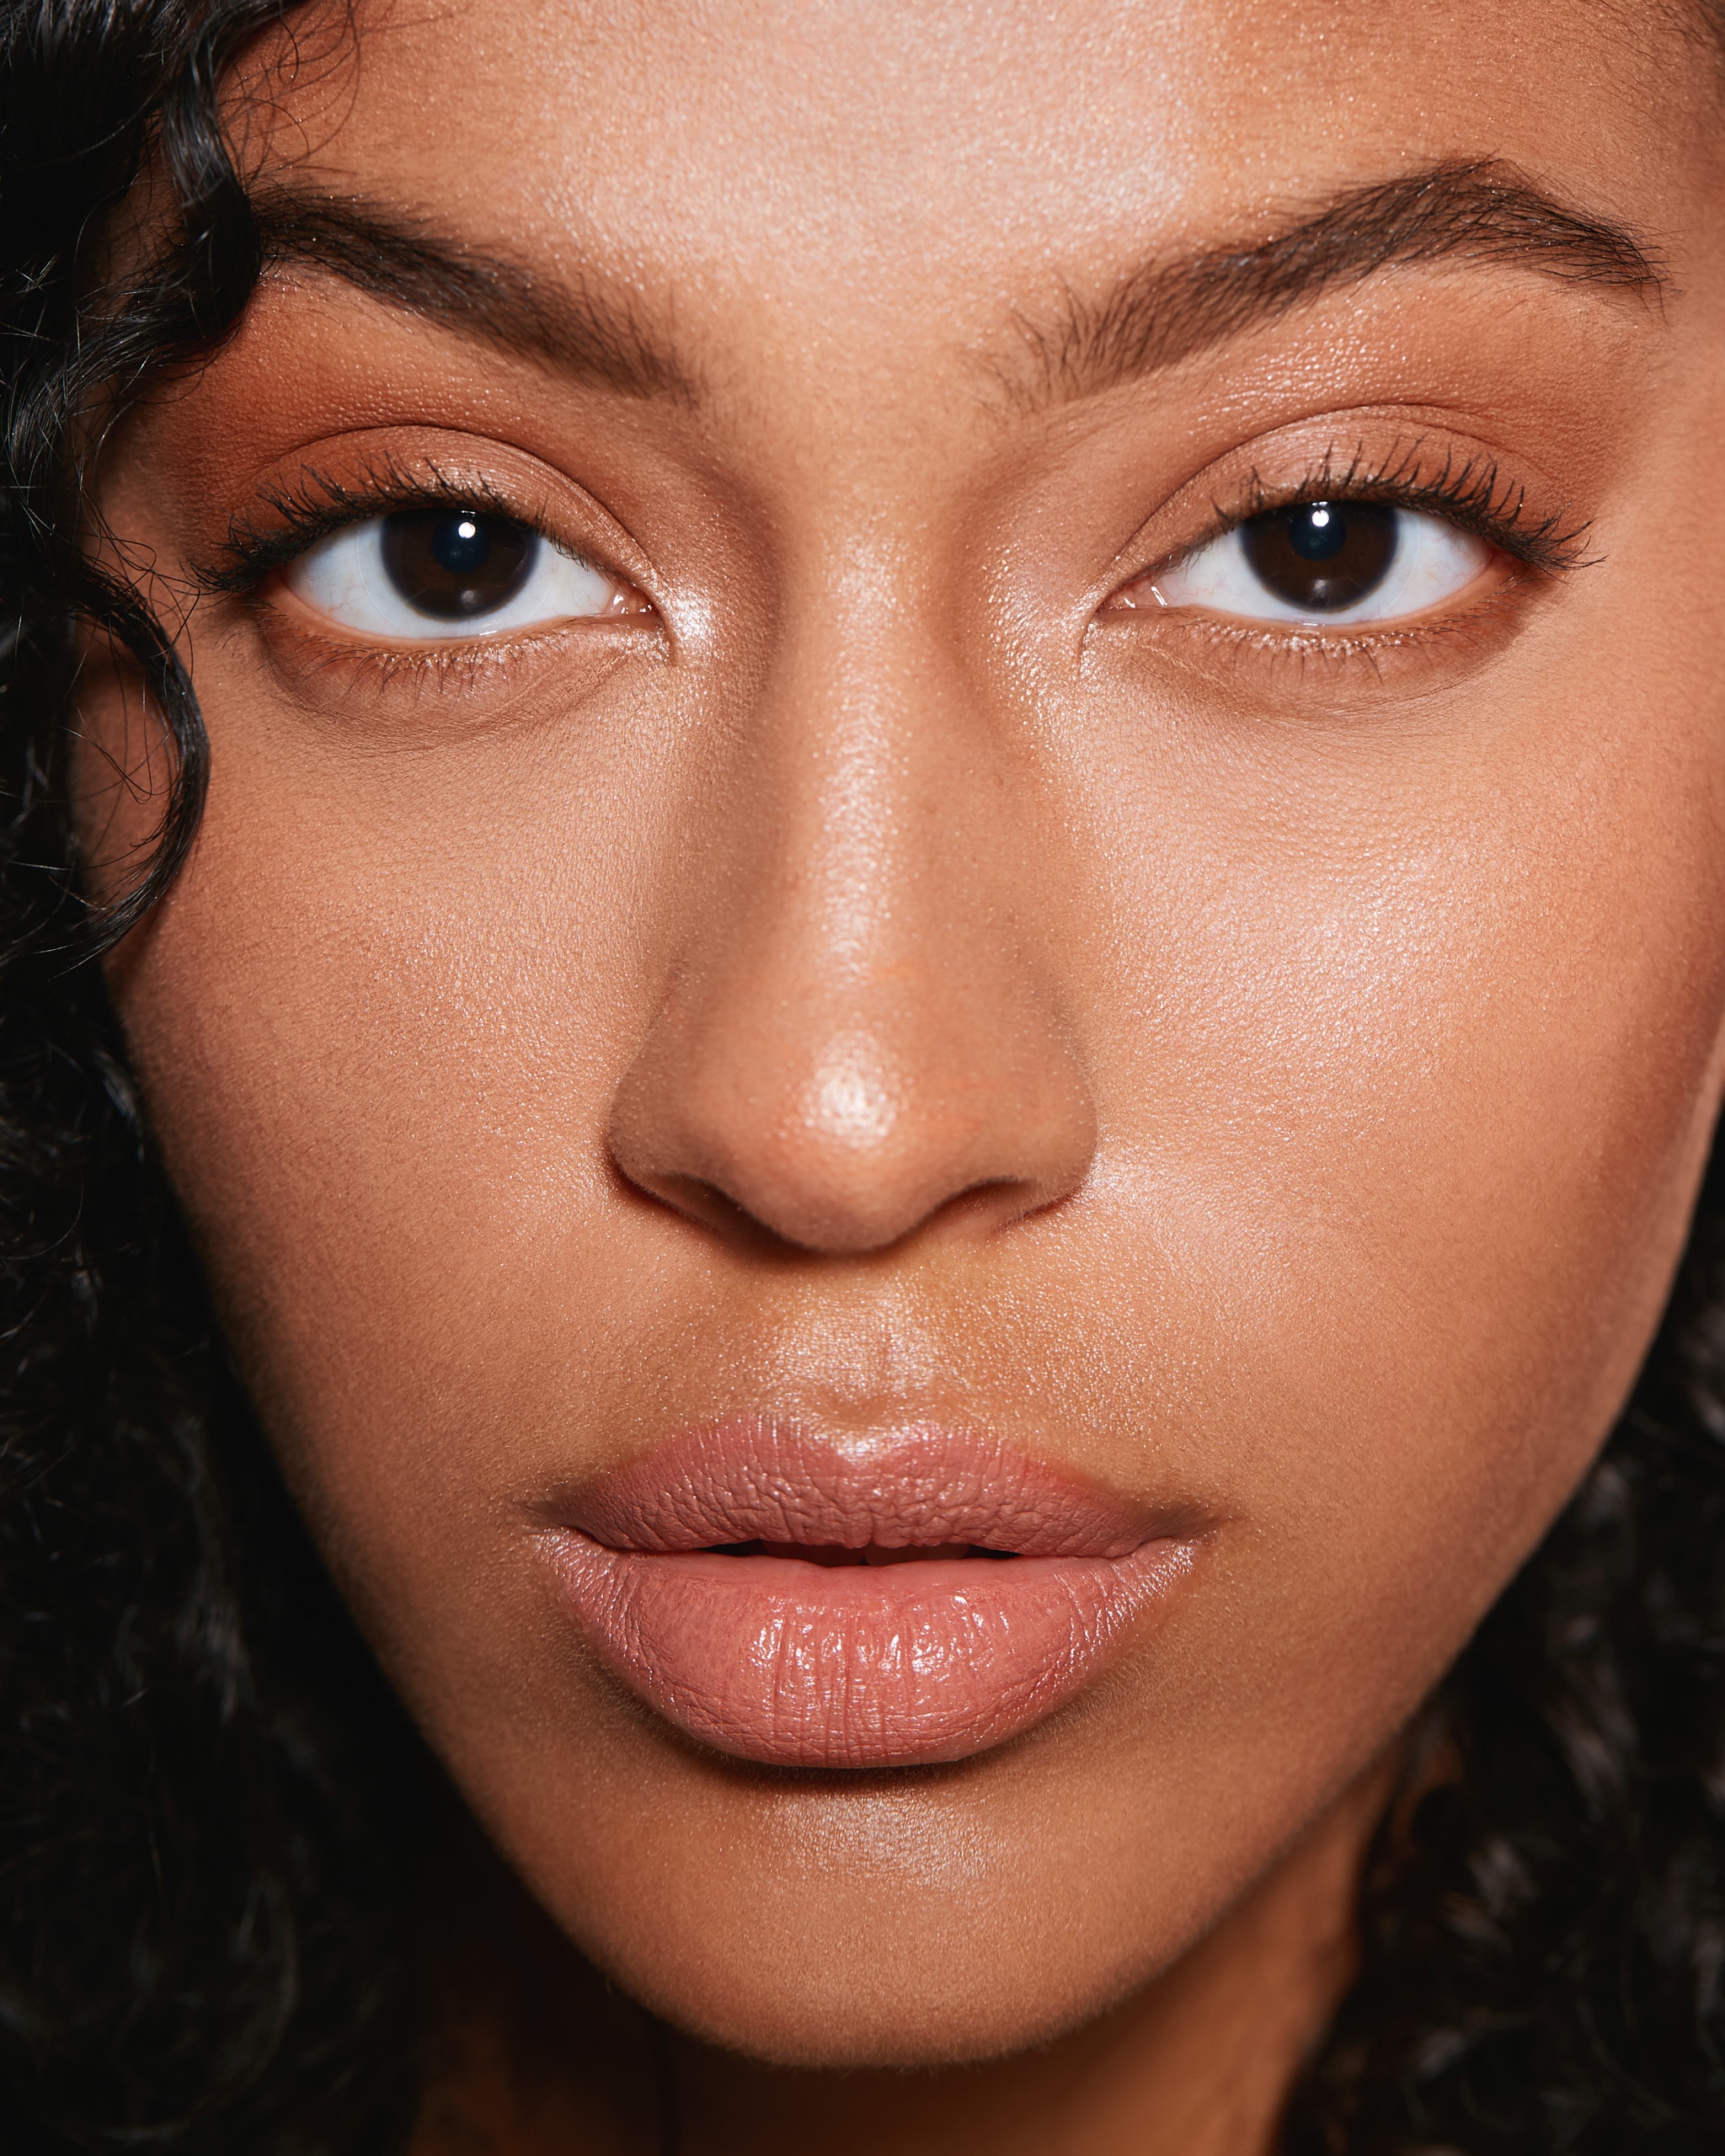 The Spot Treatment That Will Get Rid Of Your Pimples Overnight